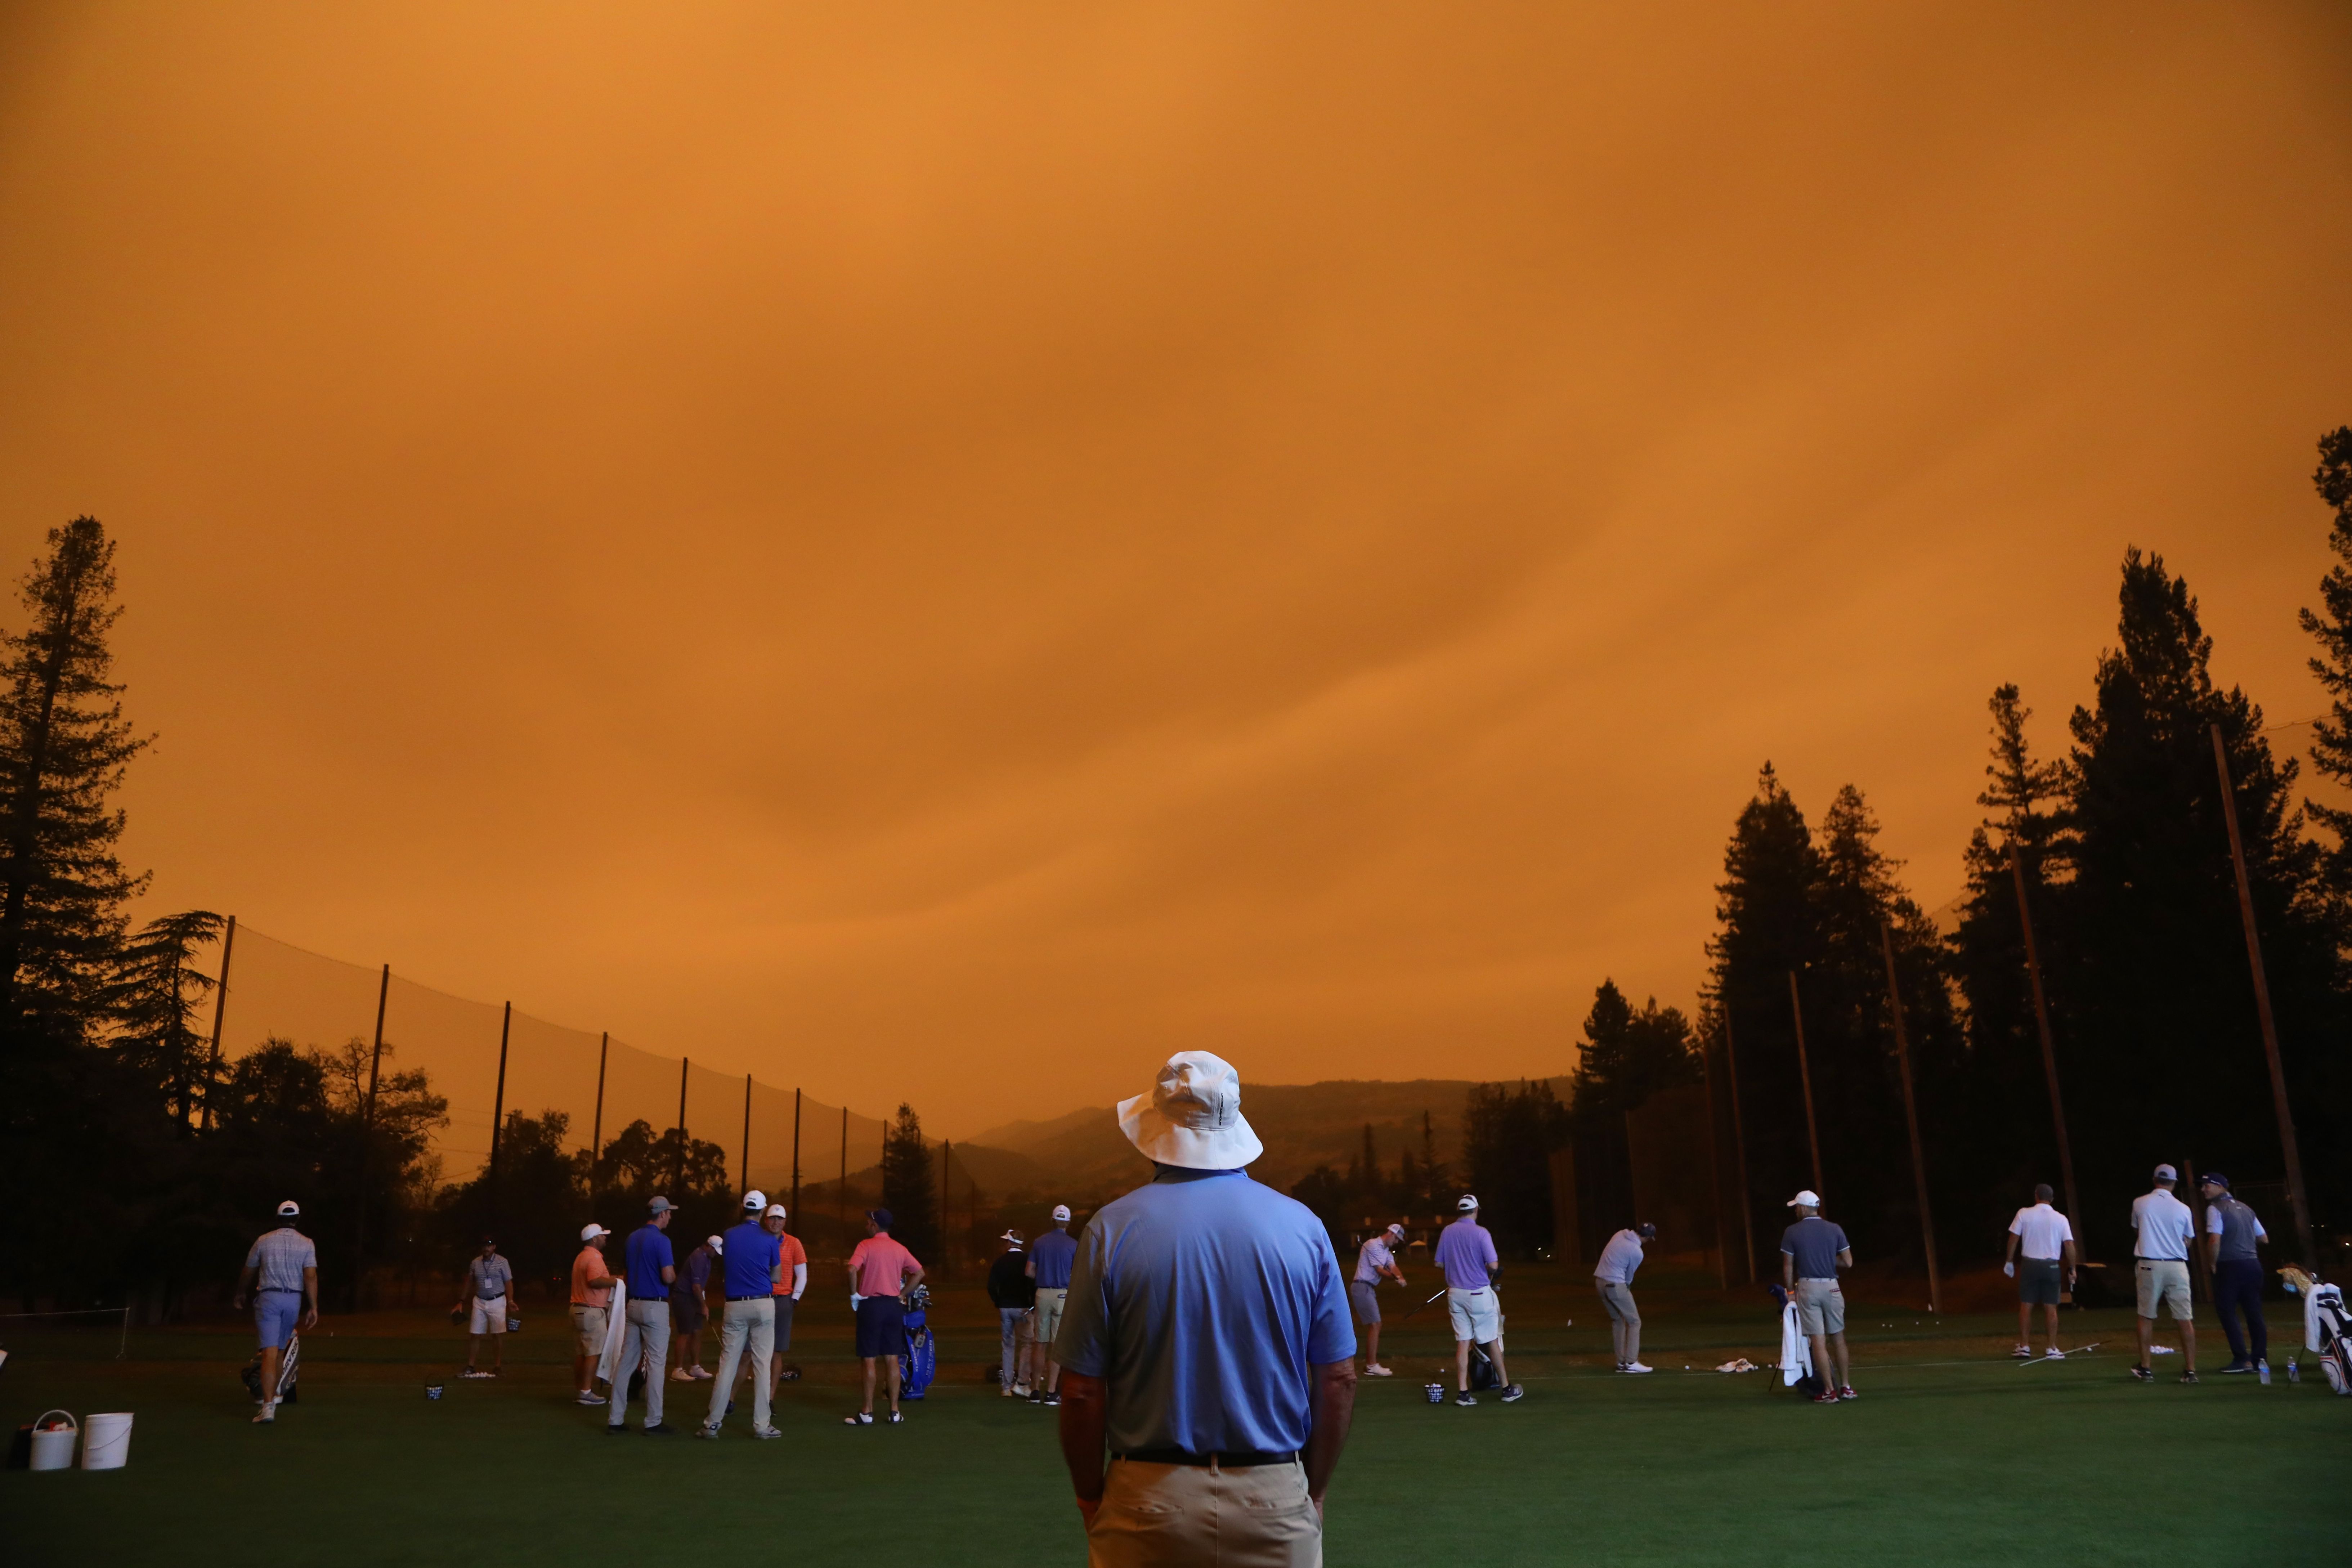 A man wearing a bucket hat stands in a field with people in the distance, under an orange sky